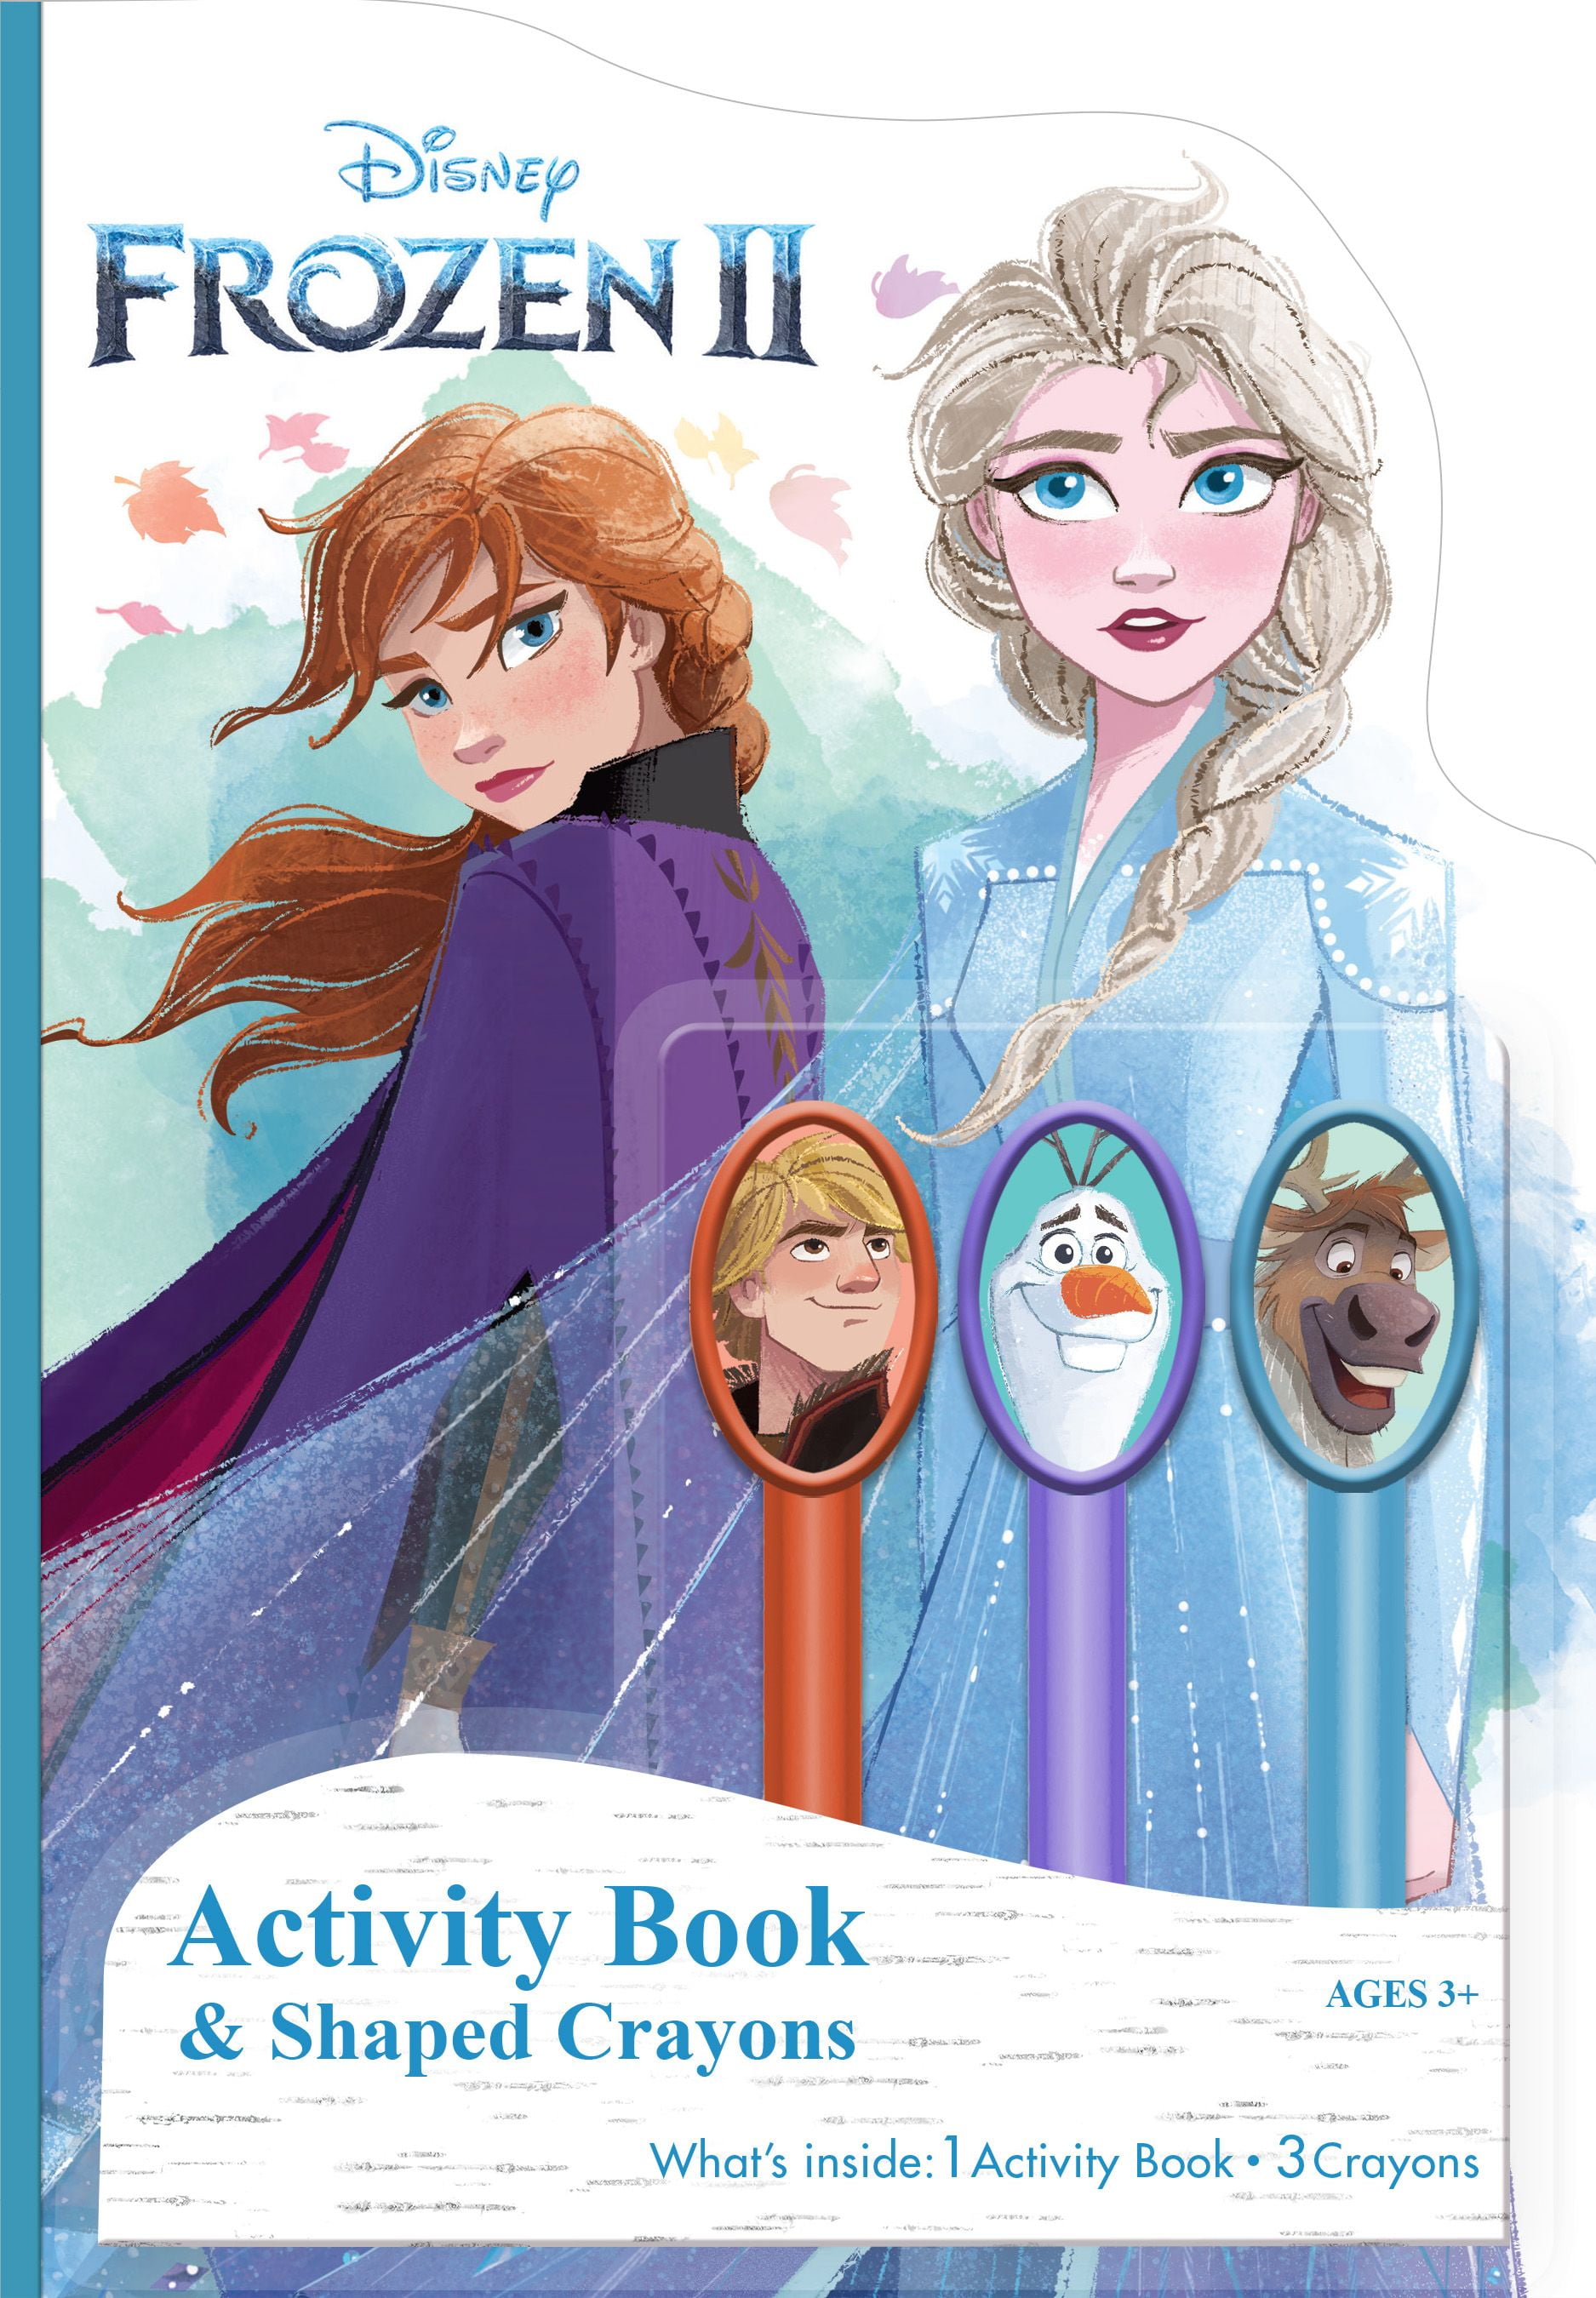 Disney Frozen Characters Peel and Stick Reusable Vinyl Stickers Stationery for sale online 